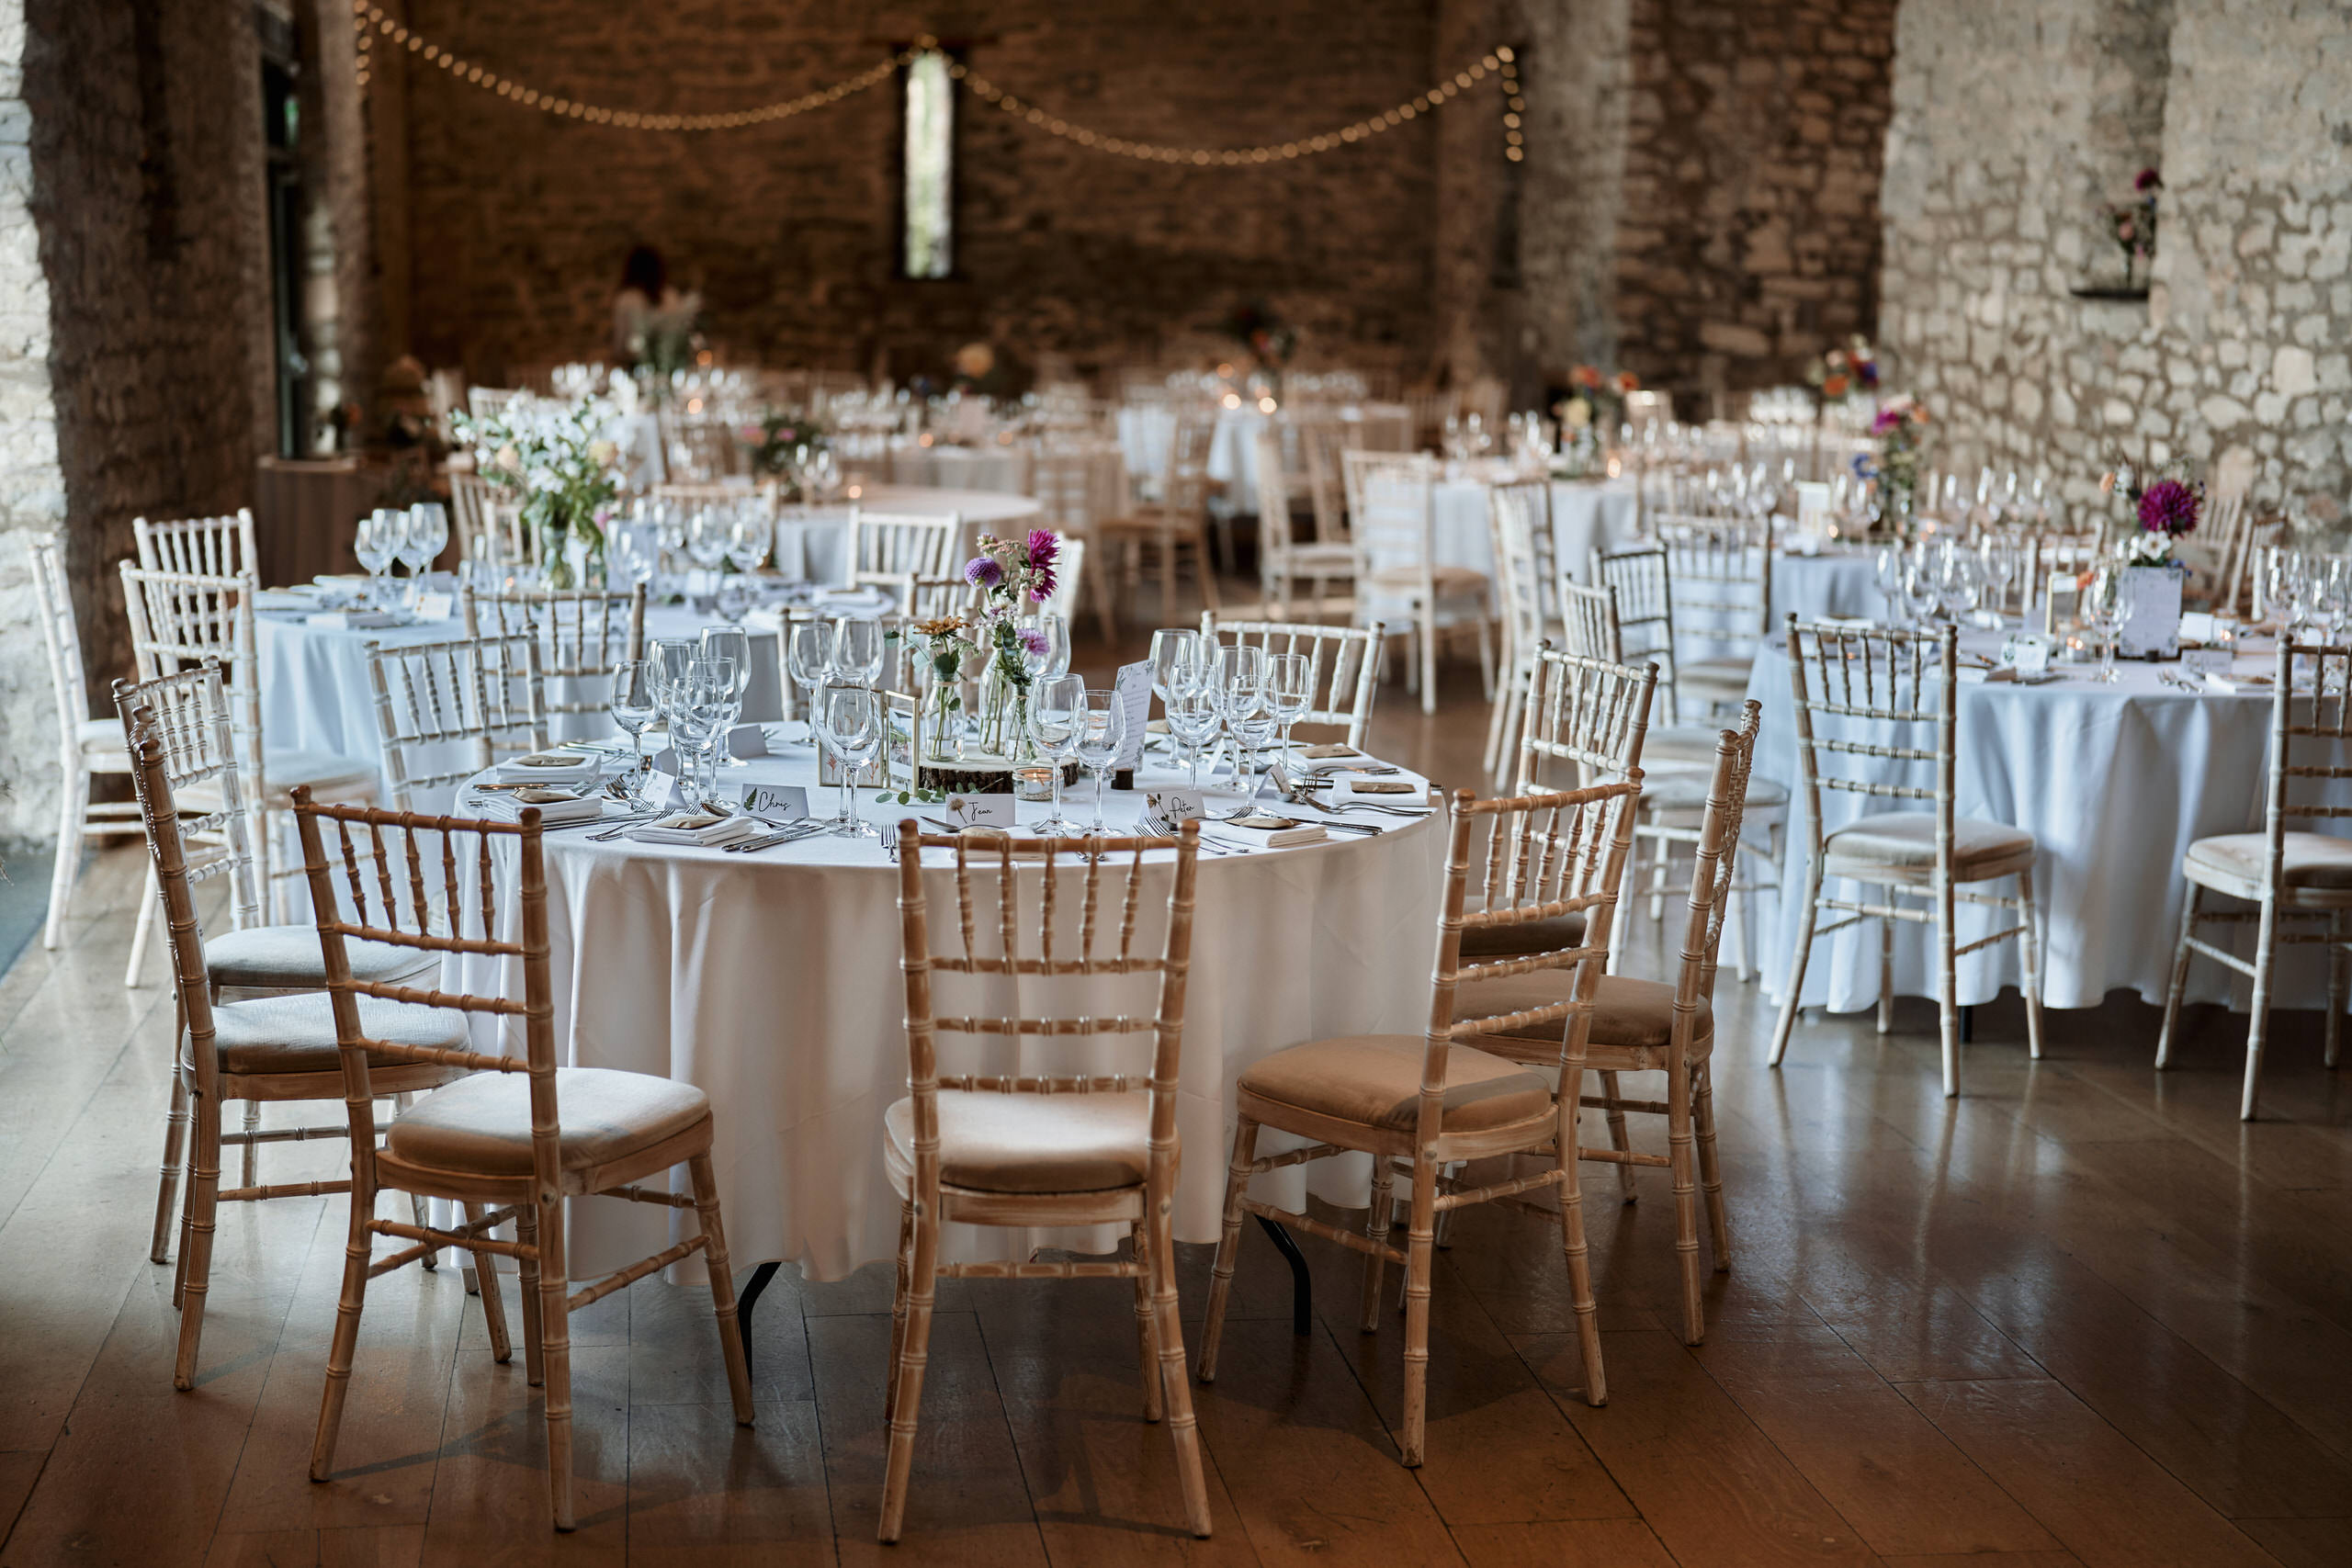 A big room set up with tables and chairs for a wedding party.